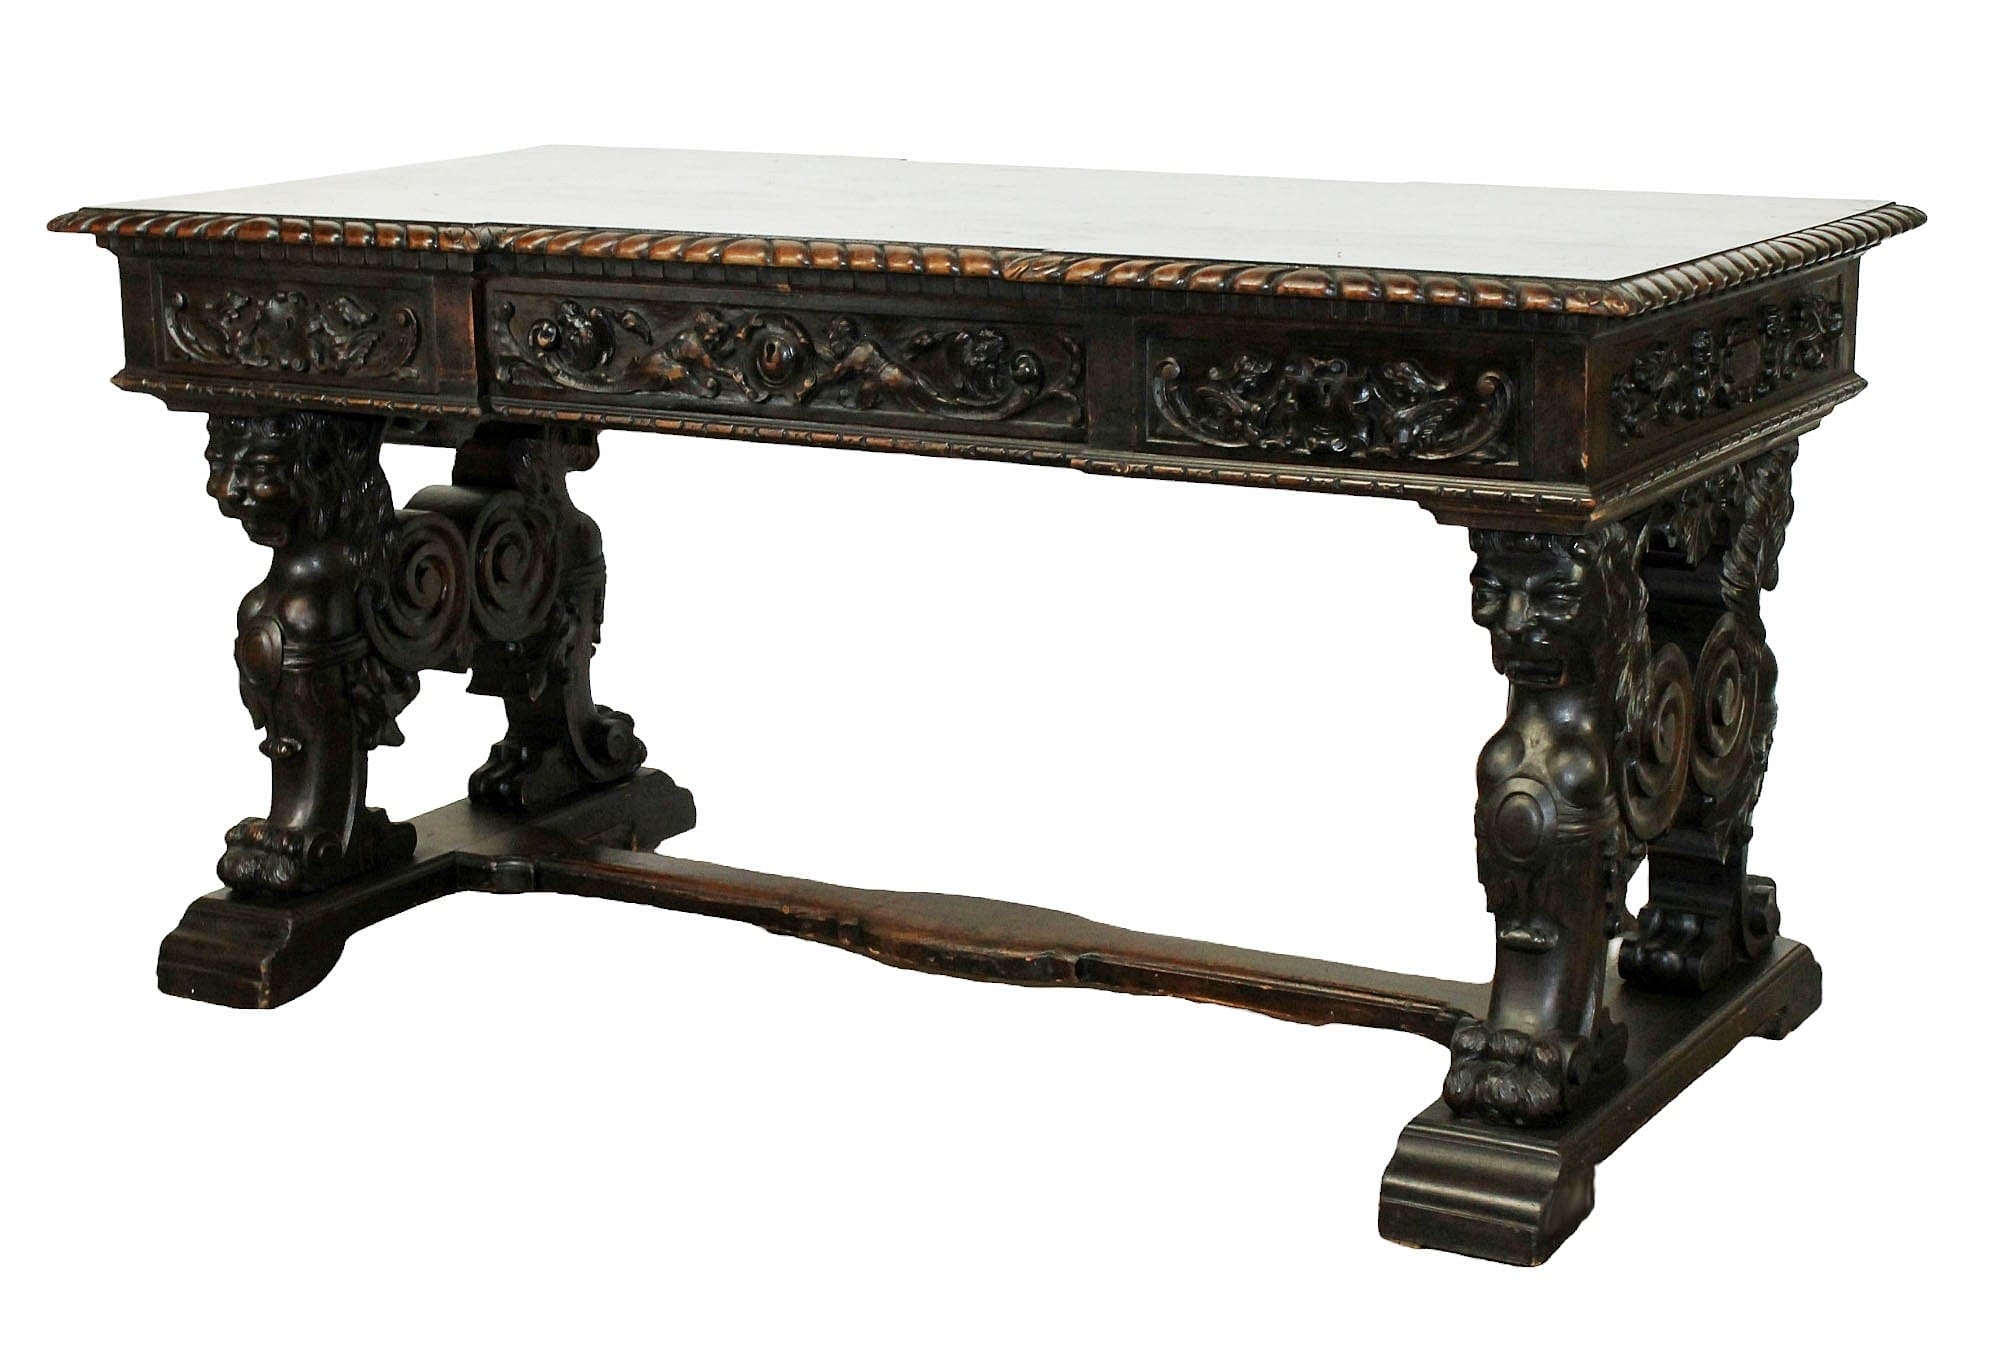 Italian Renaissance desk with carved lions